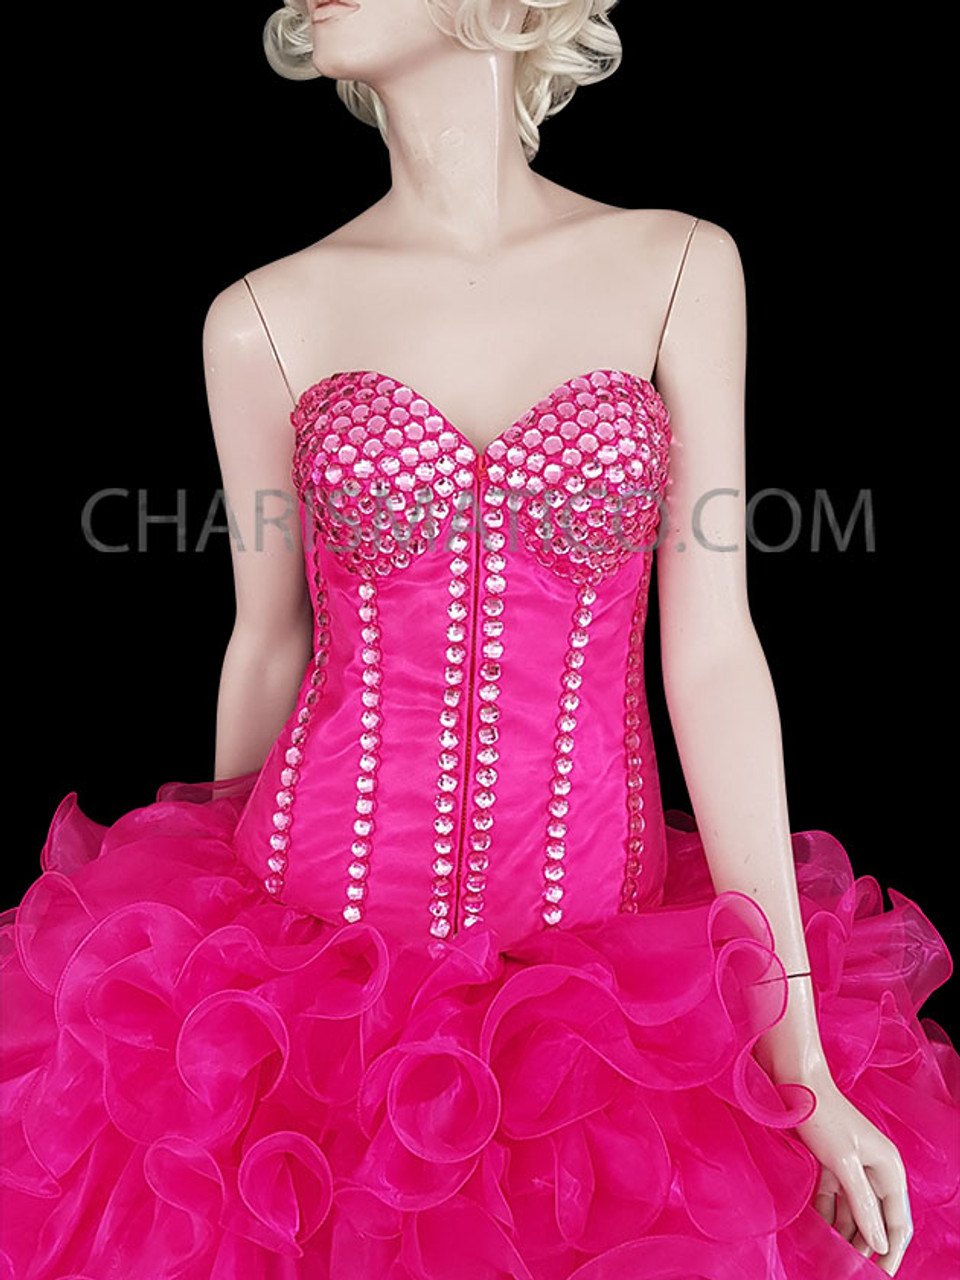 Burlesque Embroidered Hot Pink Corset With Organza Ruffle Skirt